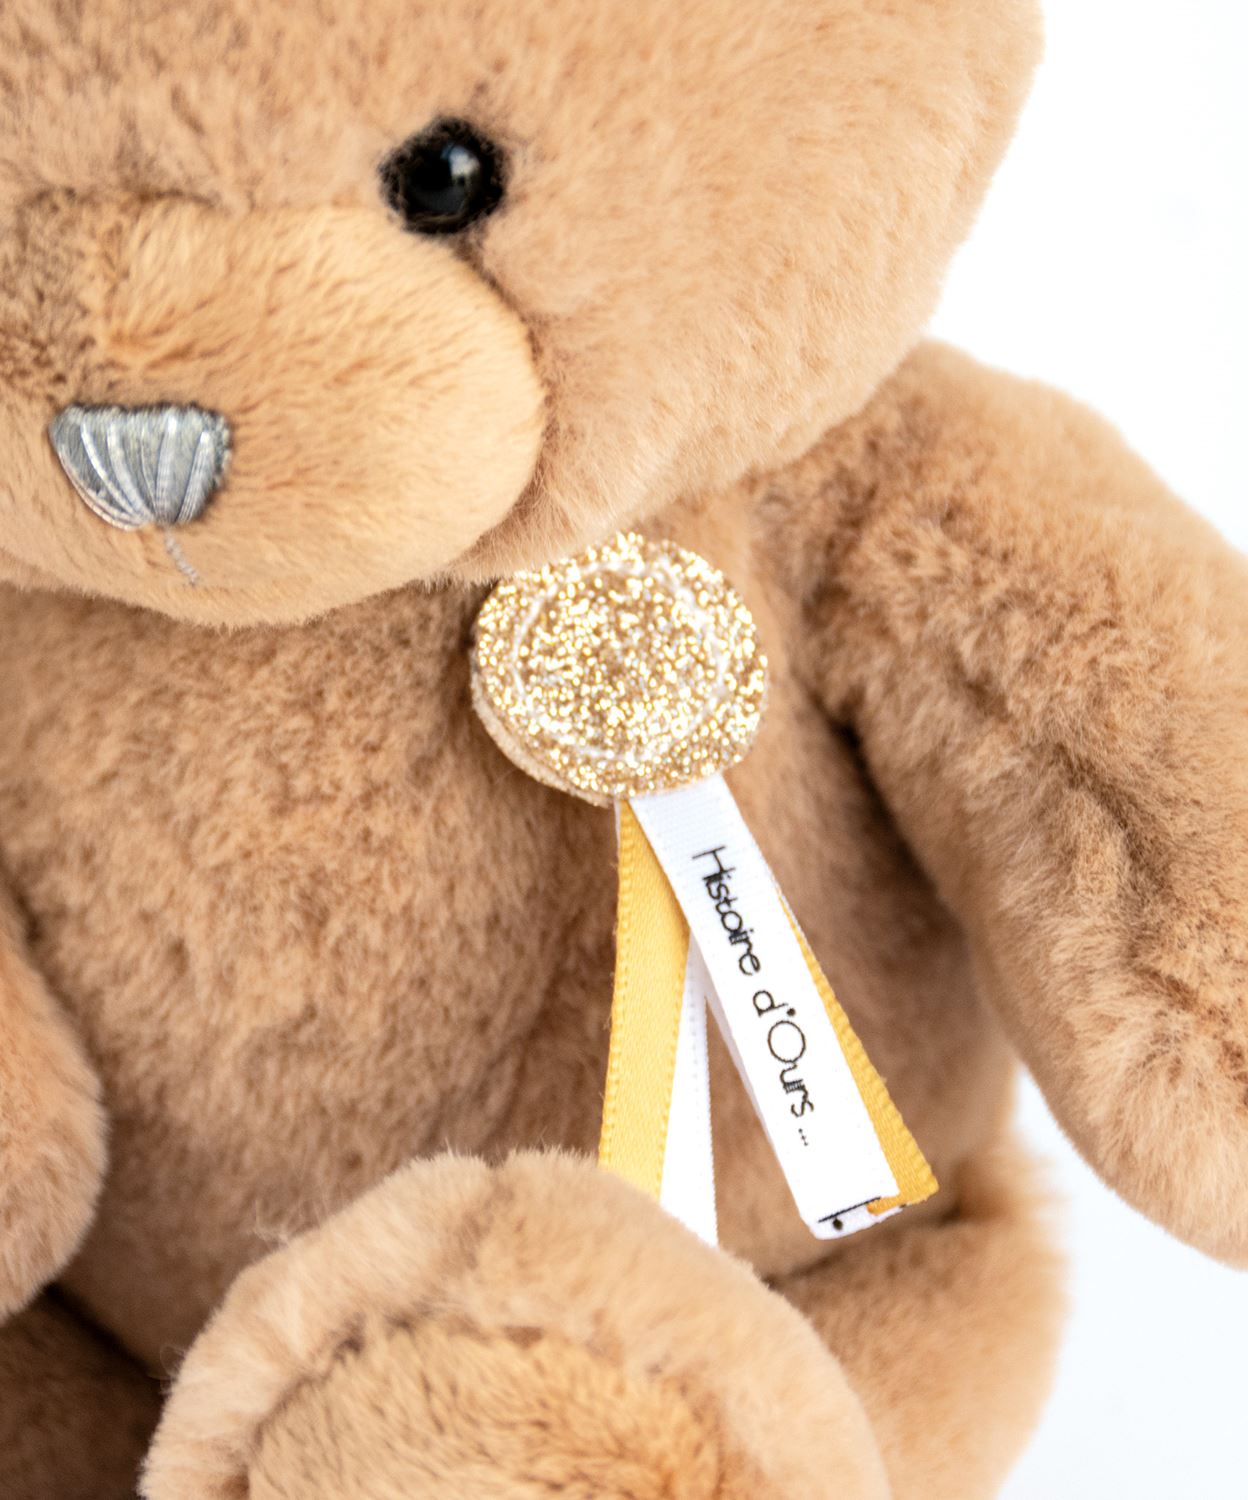 Doudou et Compagnie Histoire D'ours Teddy Bear Charms Brown Teddy Bear Charms